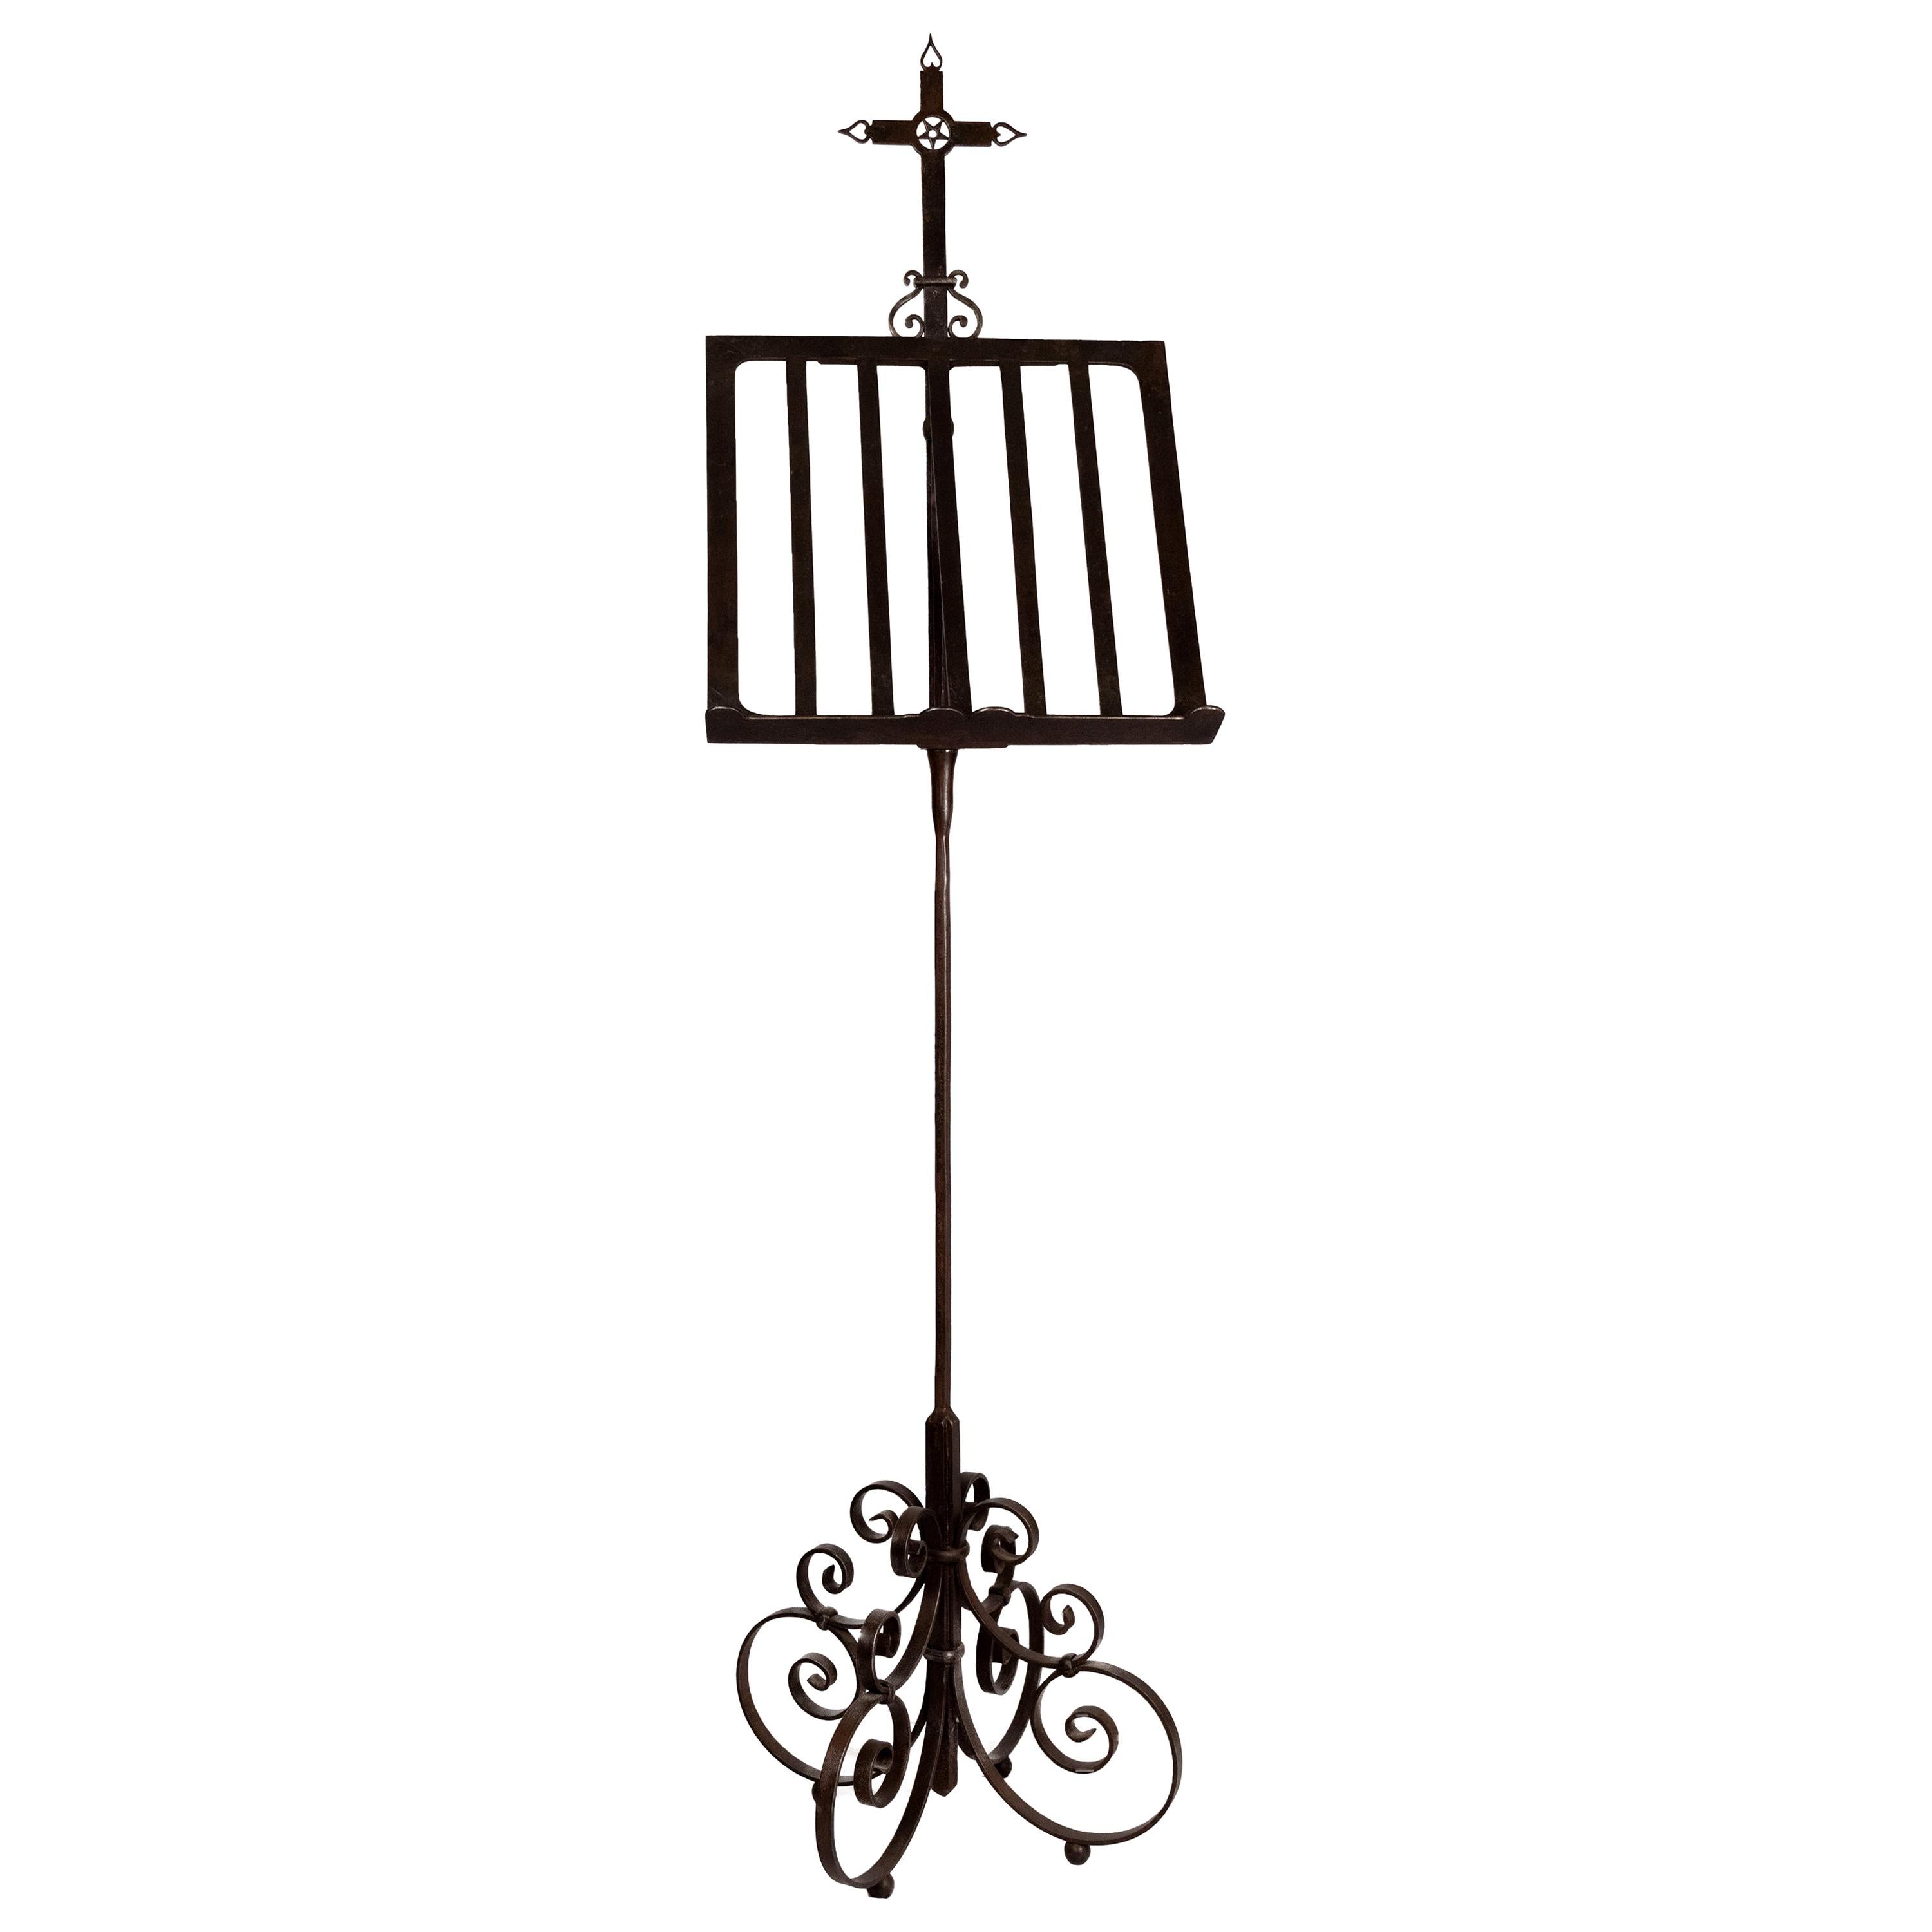 Monumental Wrought Iron Lectern or Bookstand